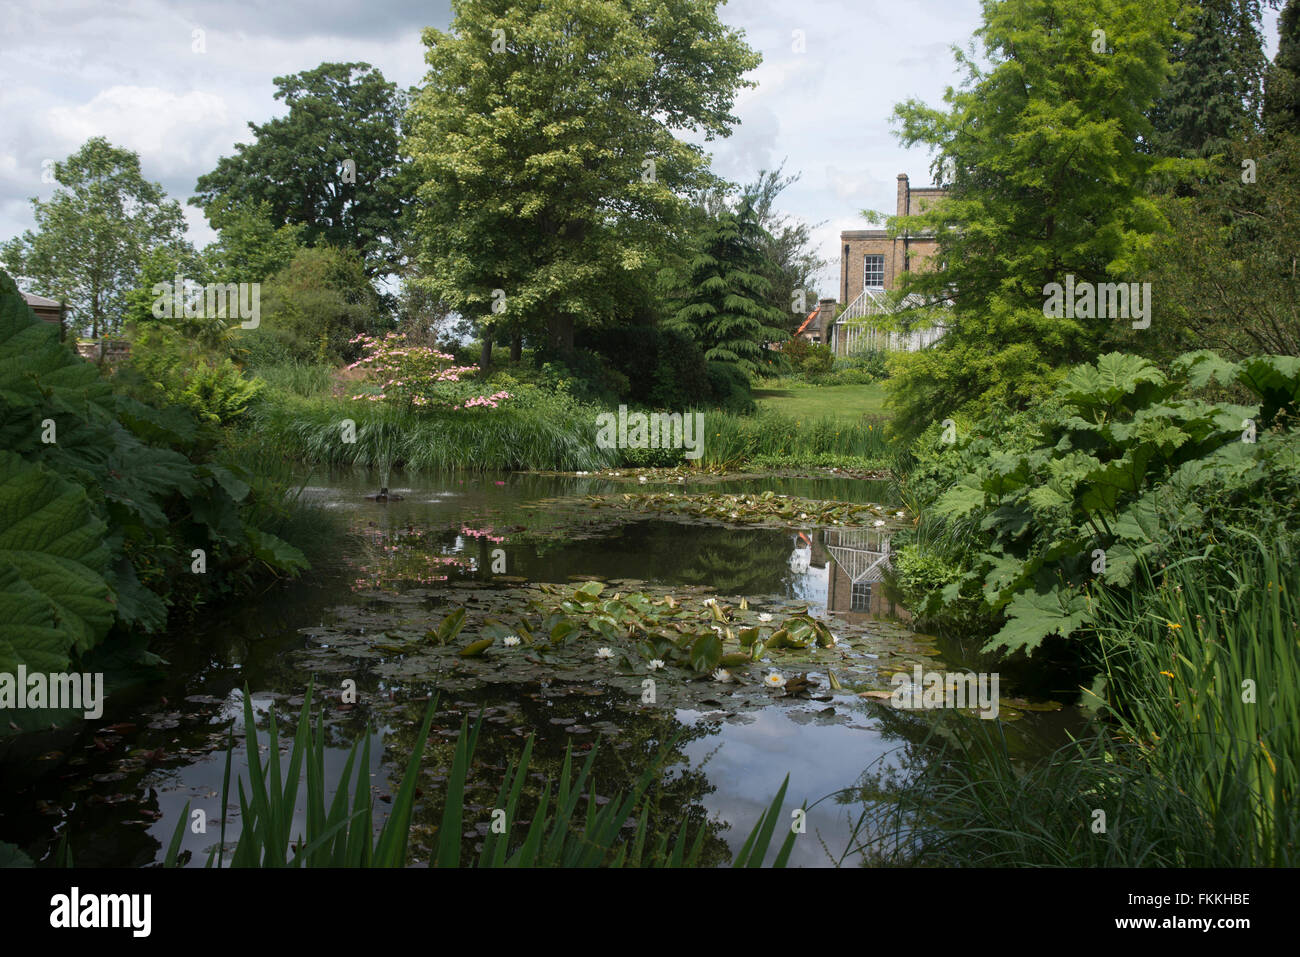 A view of the Myddelton House Gardens in Enfield, a summers day. Stock Photo